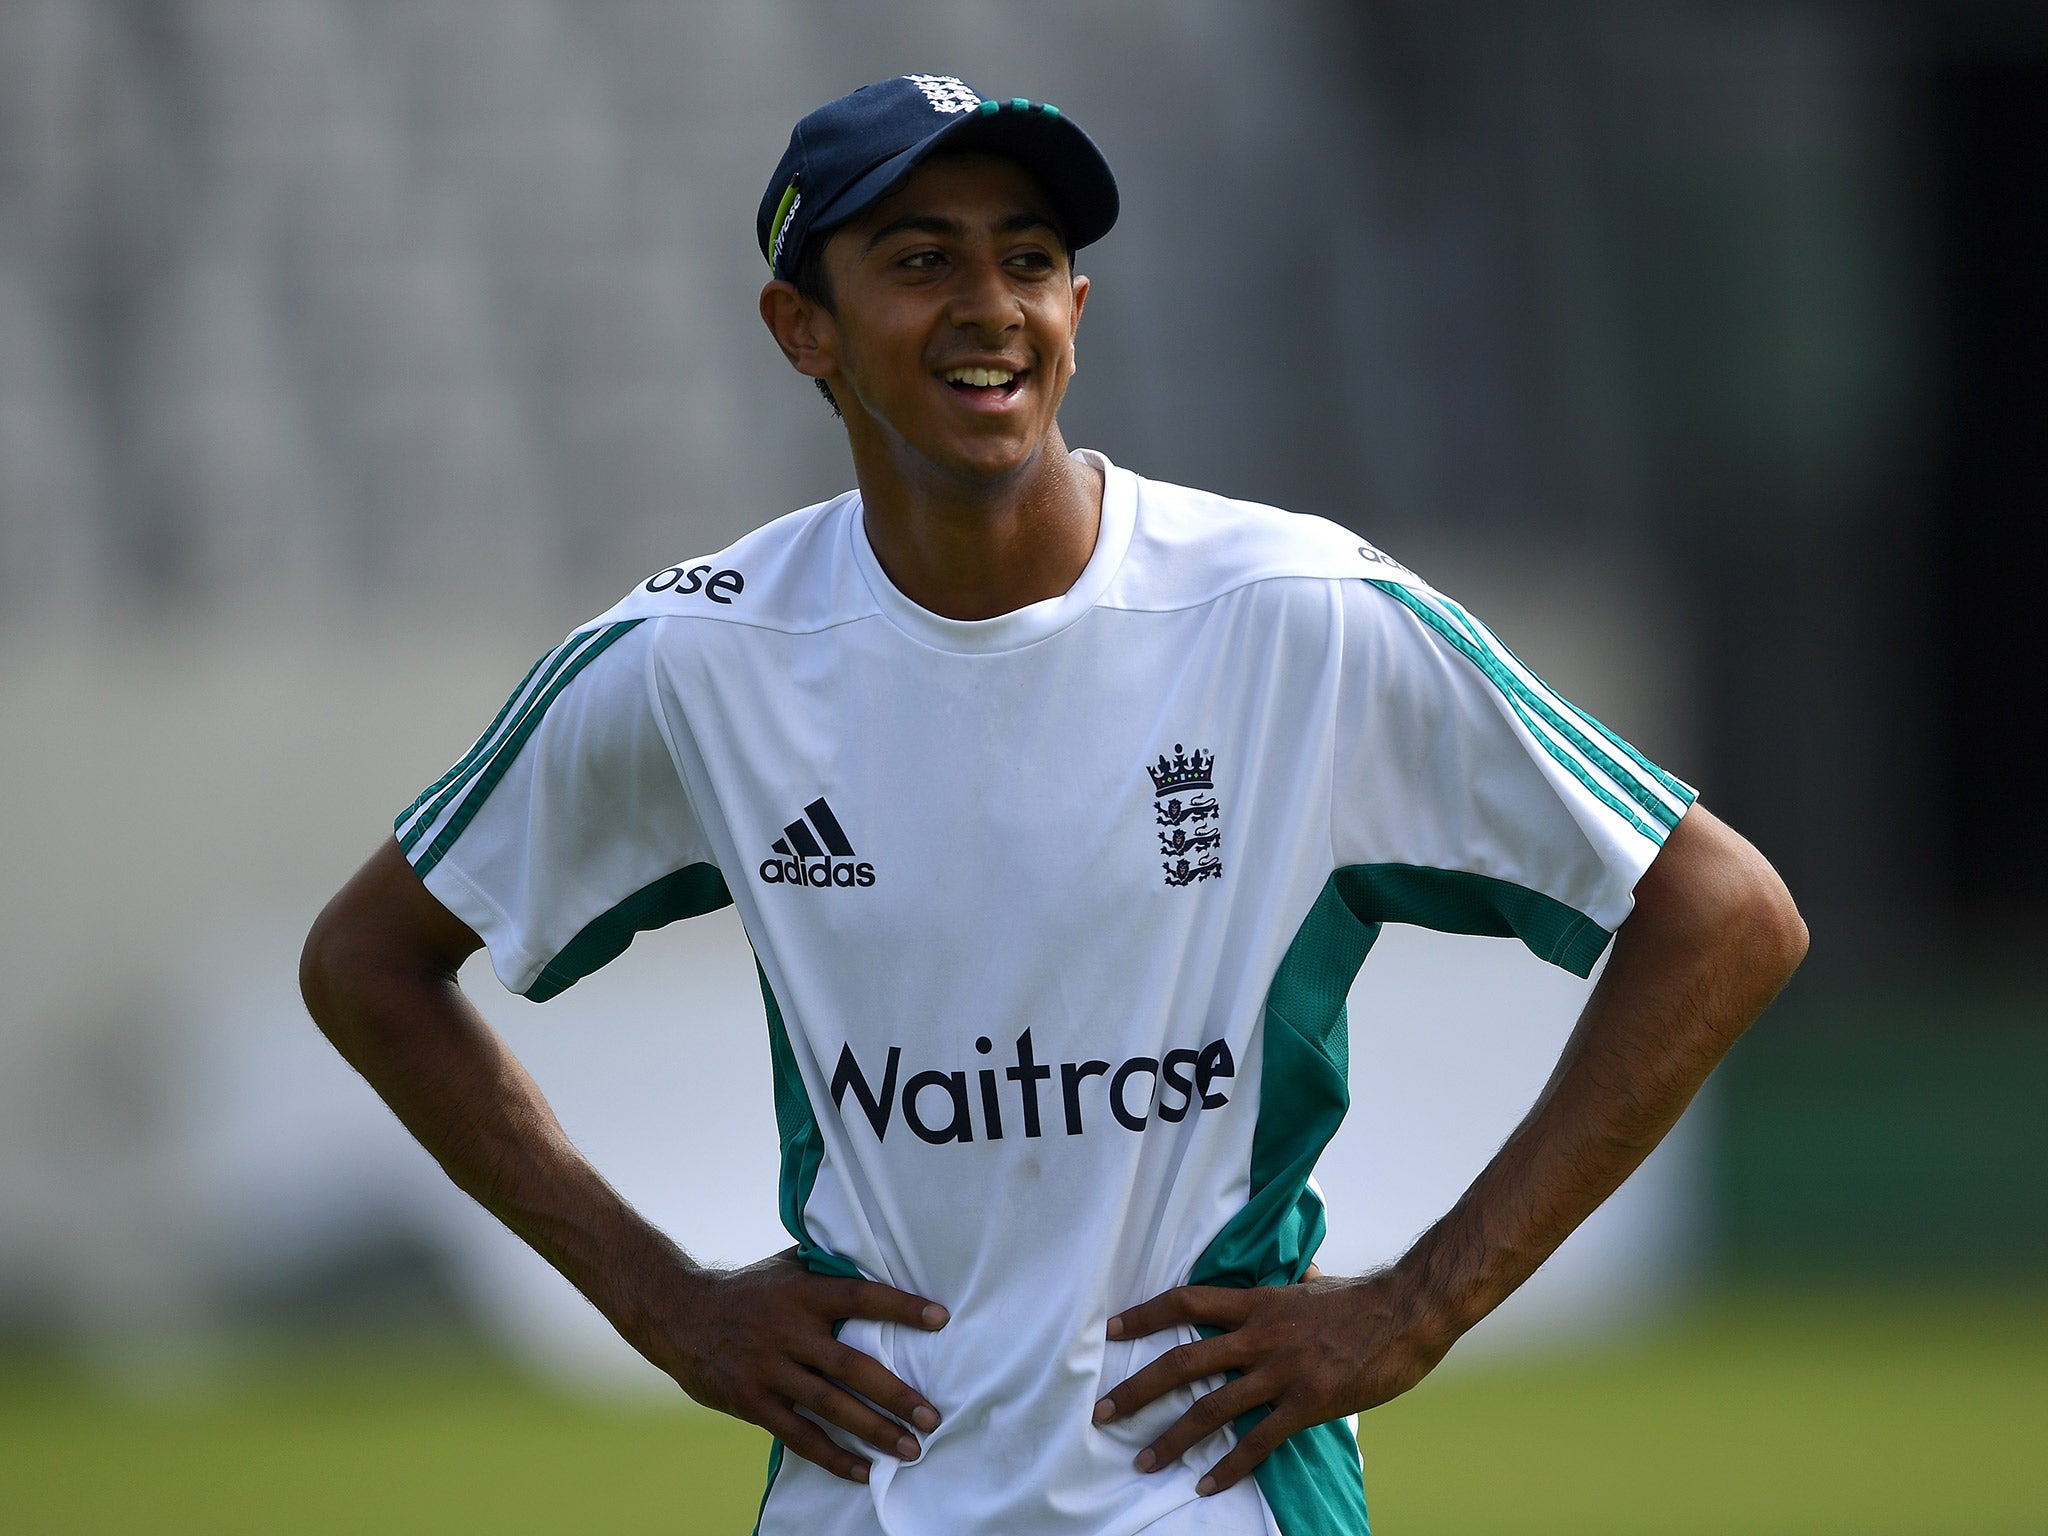 Haseeb Hameed will make his England debut at the age of 19 against India in the first Test